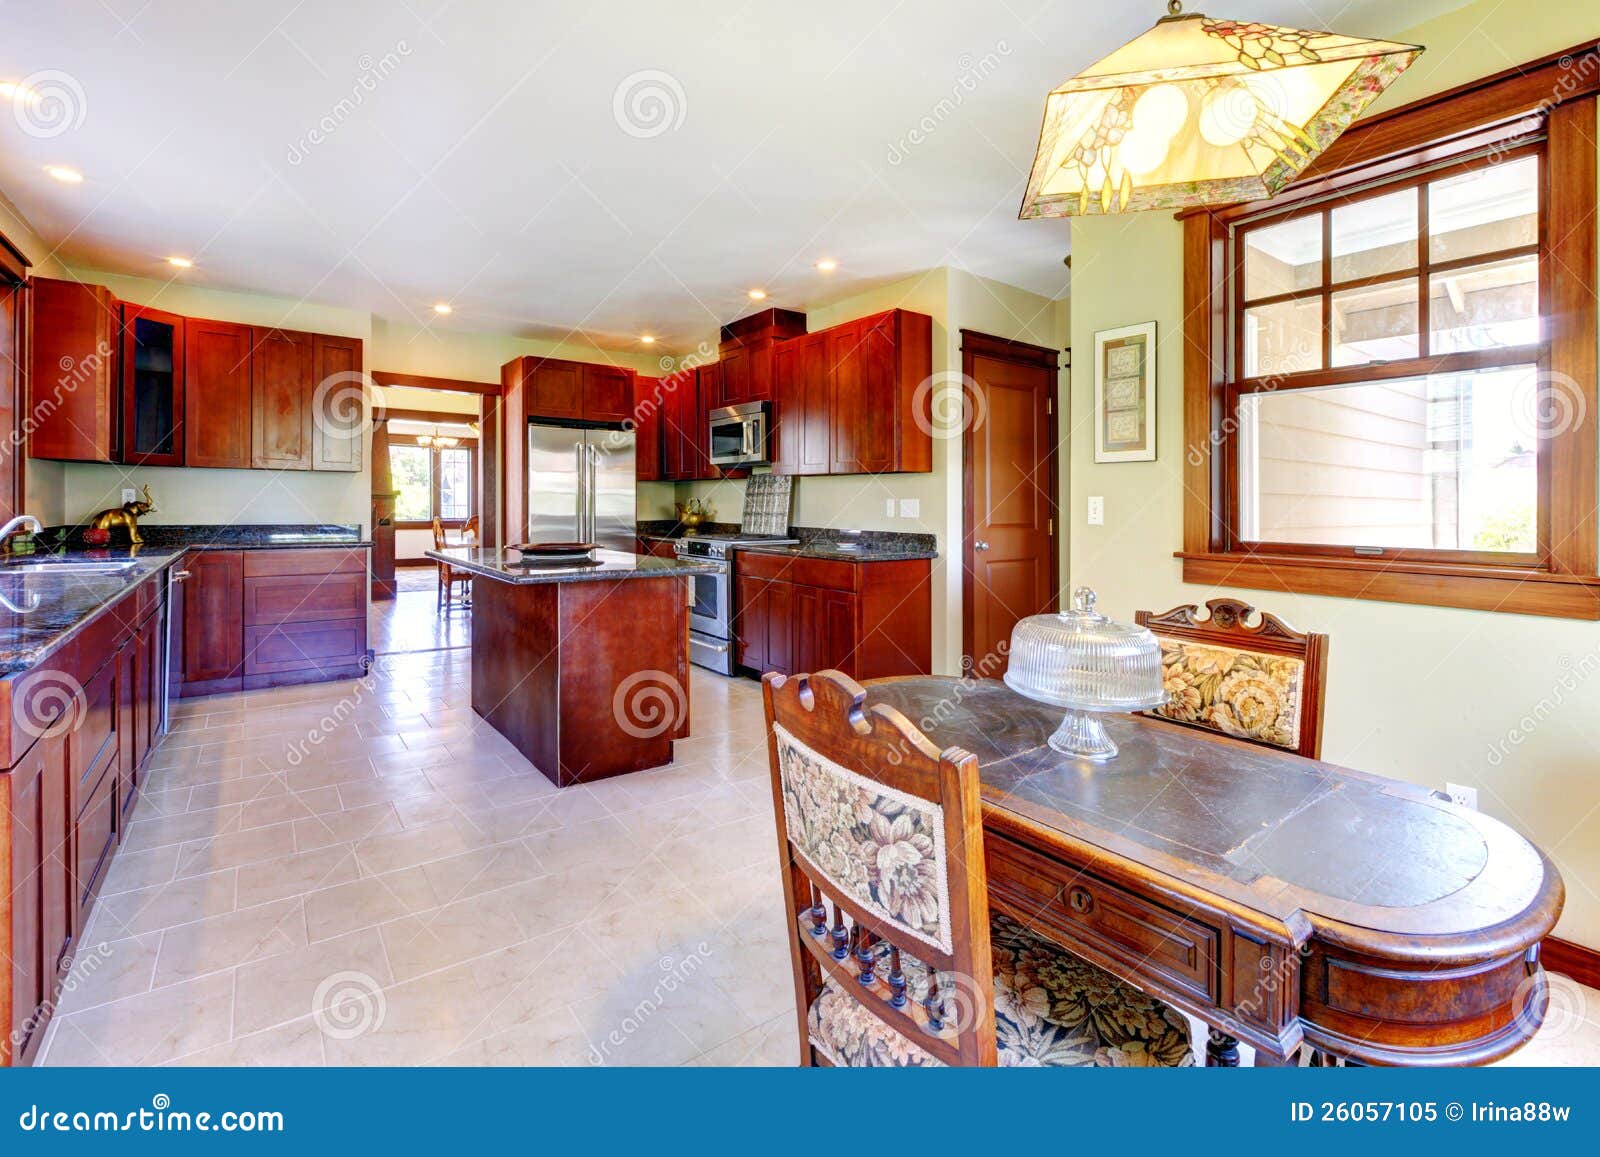 Large Chery Wood Kitchen With Dining Room Table. Royalty 